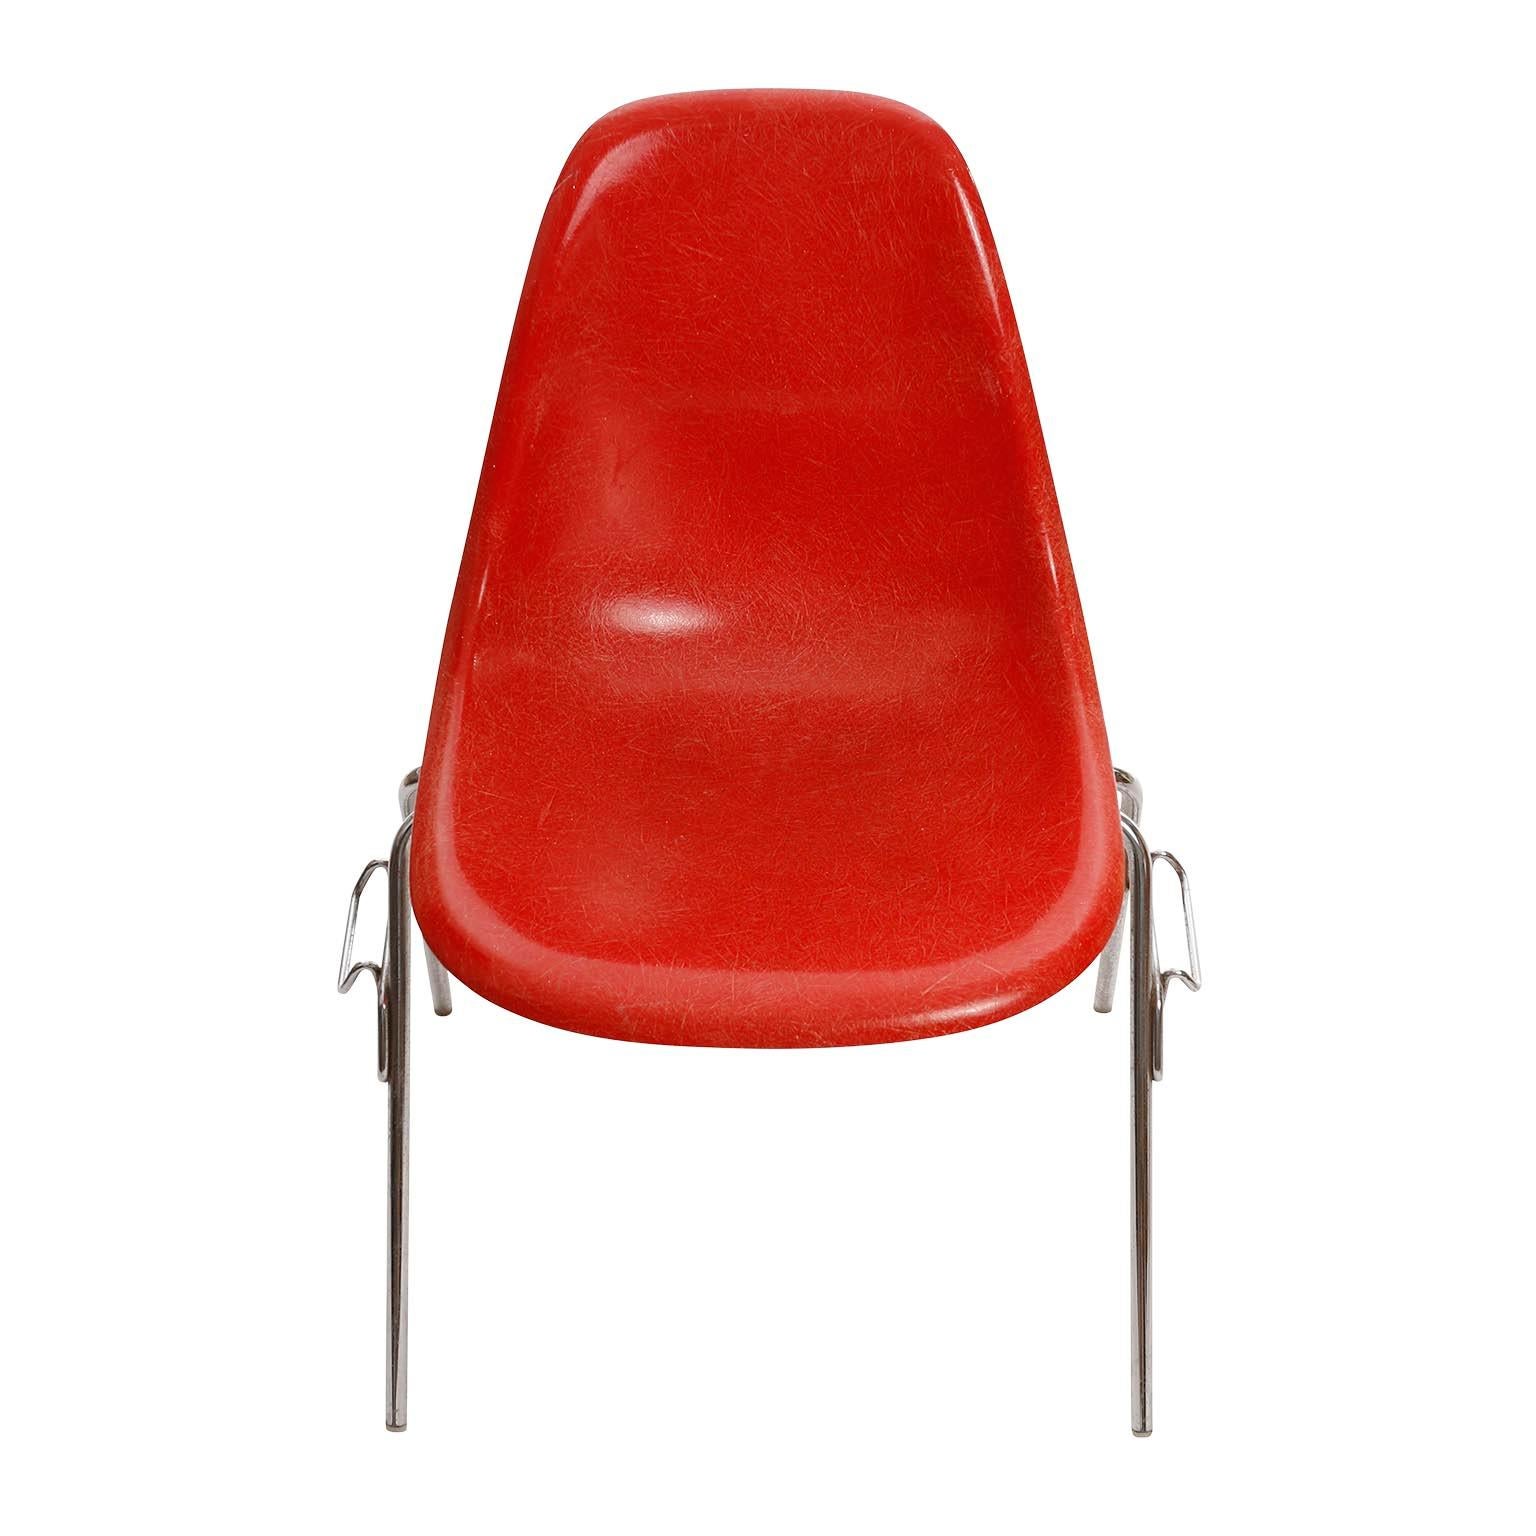 American 22 DSS Stacking Chairs, Charles & Ray Eames, Herman Miller, Red Fiberglass, 1974 For Sale